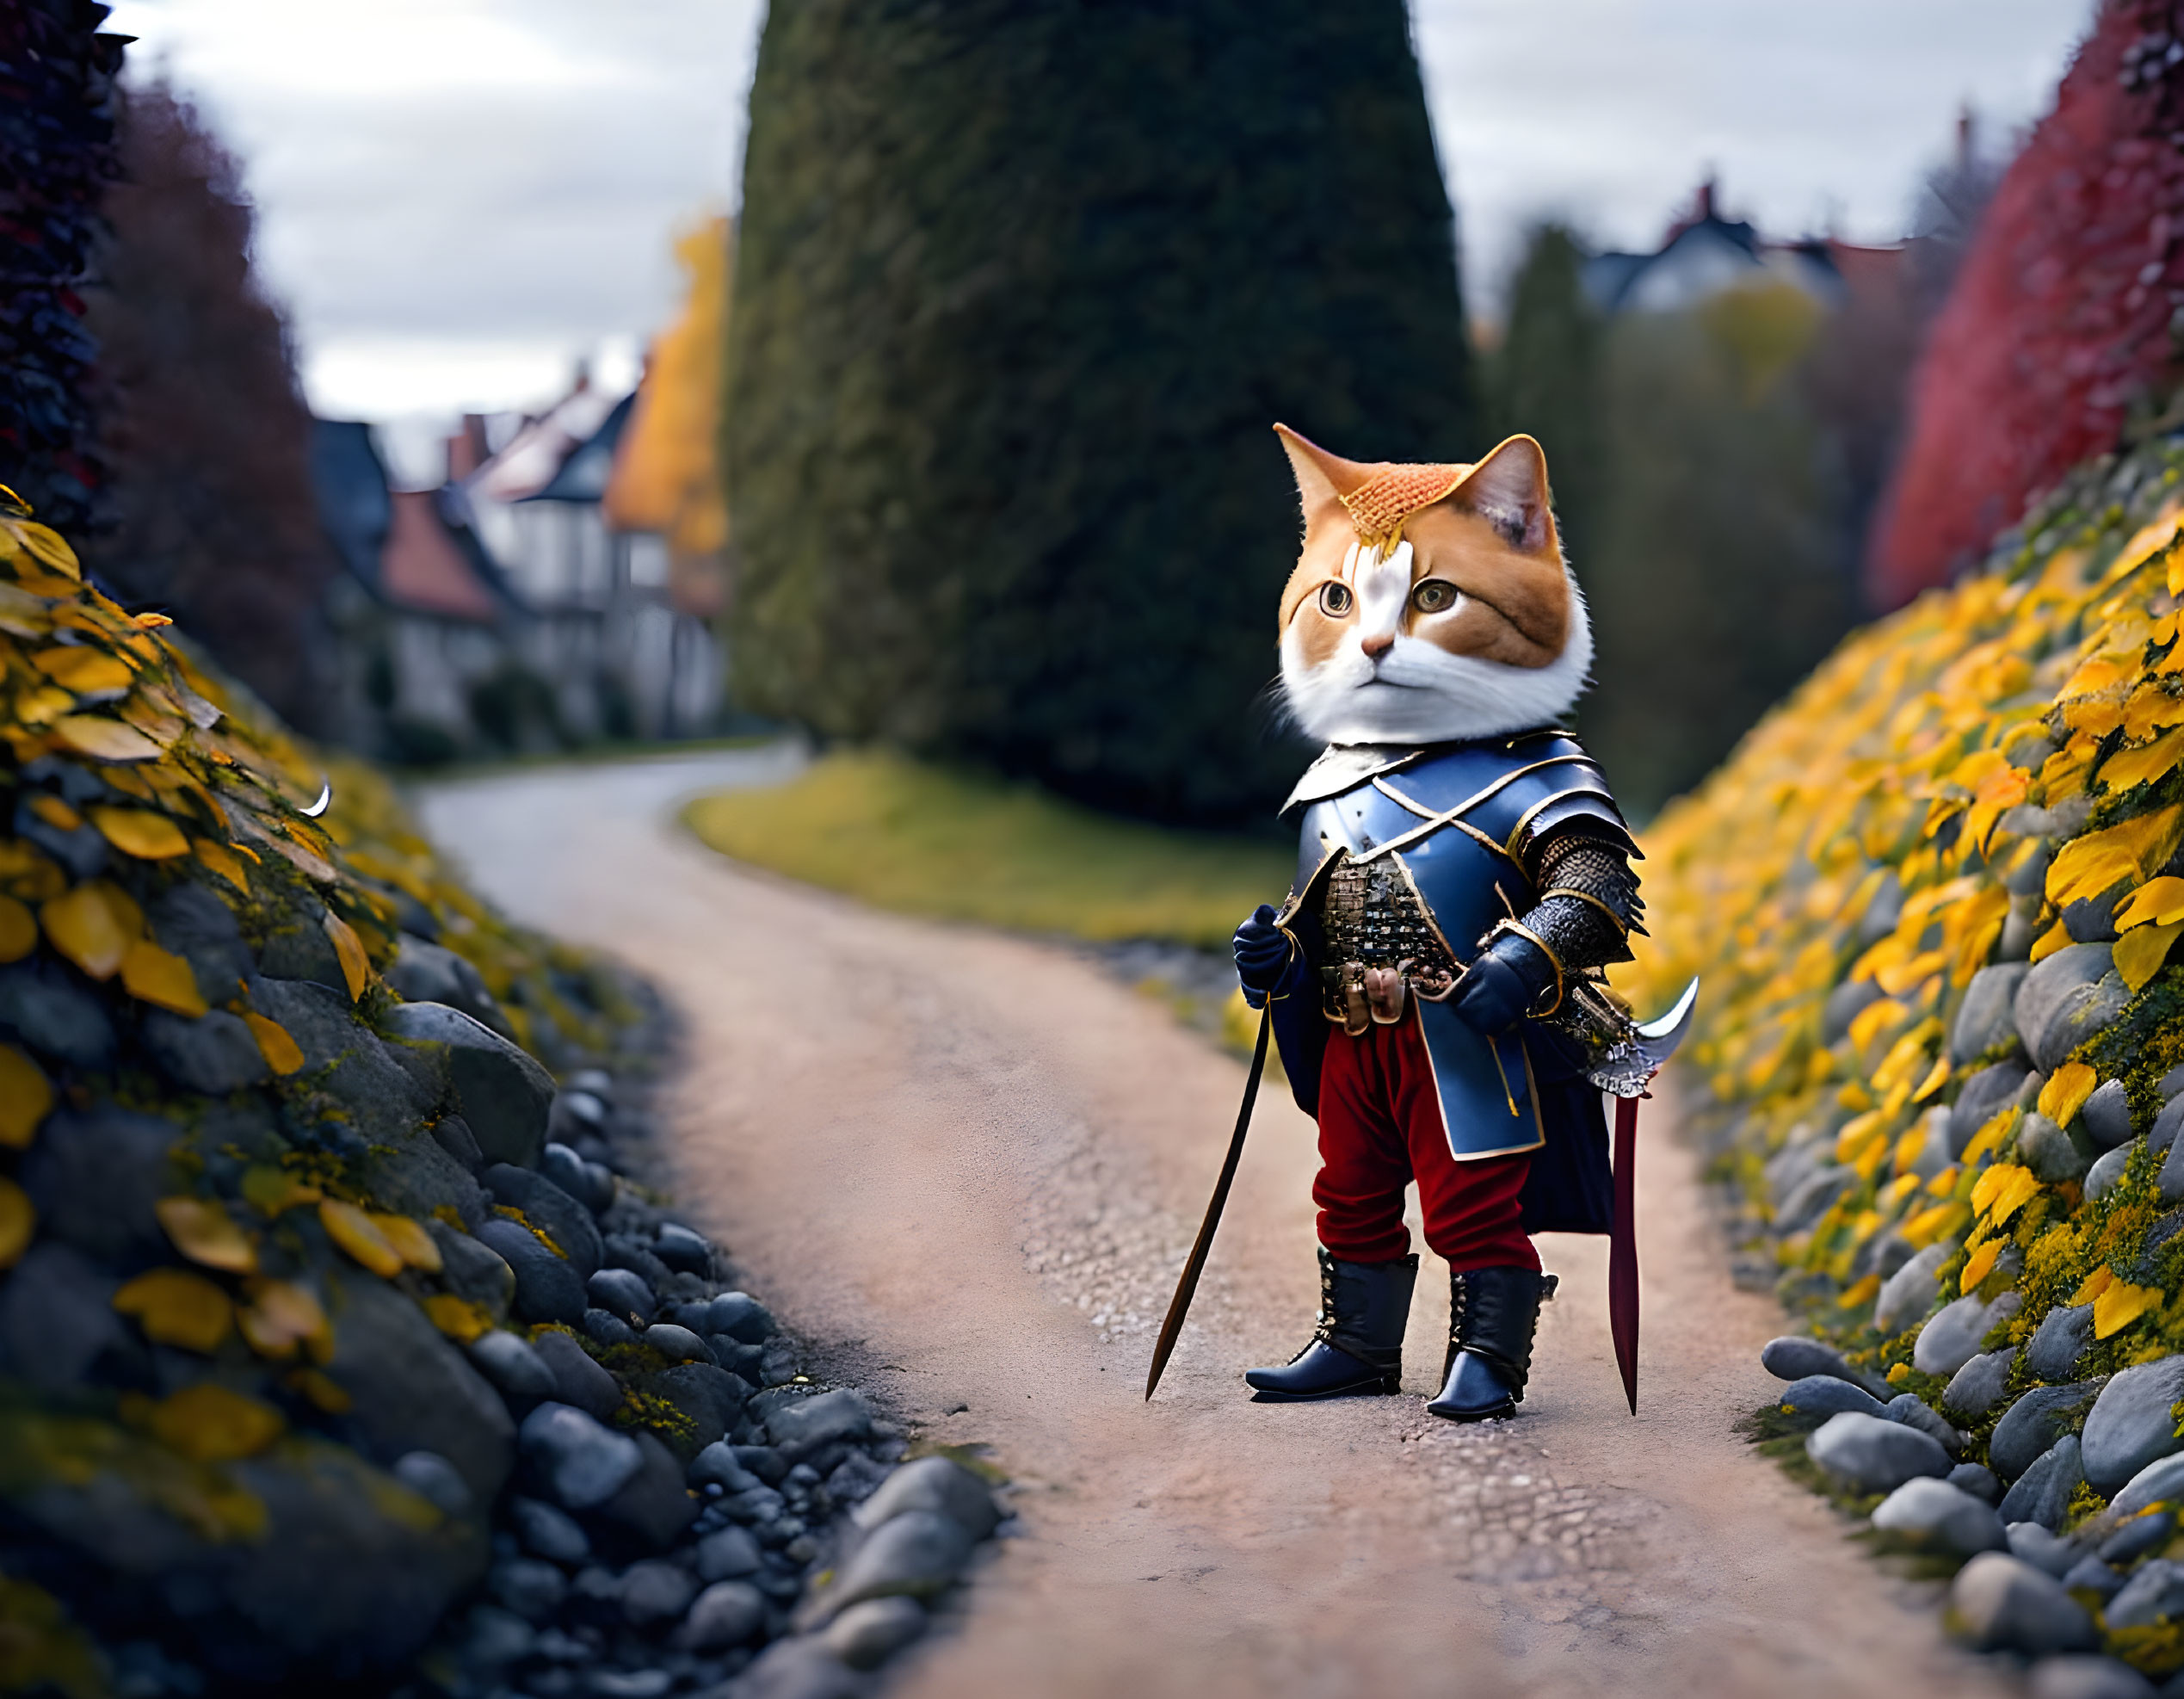 Cat in medieval armor with sword on cobblestone path lined with autumn leaves